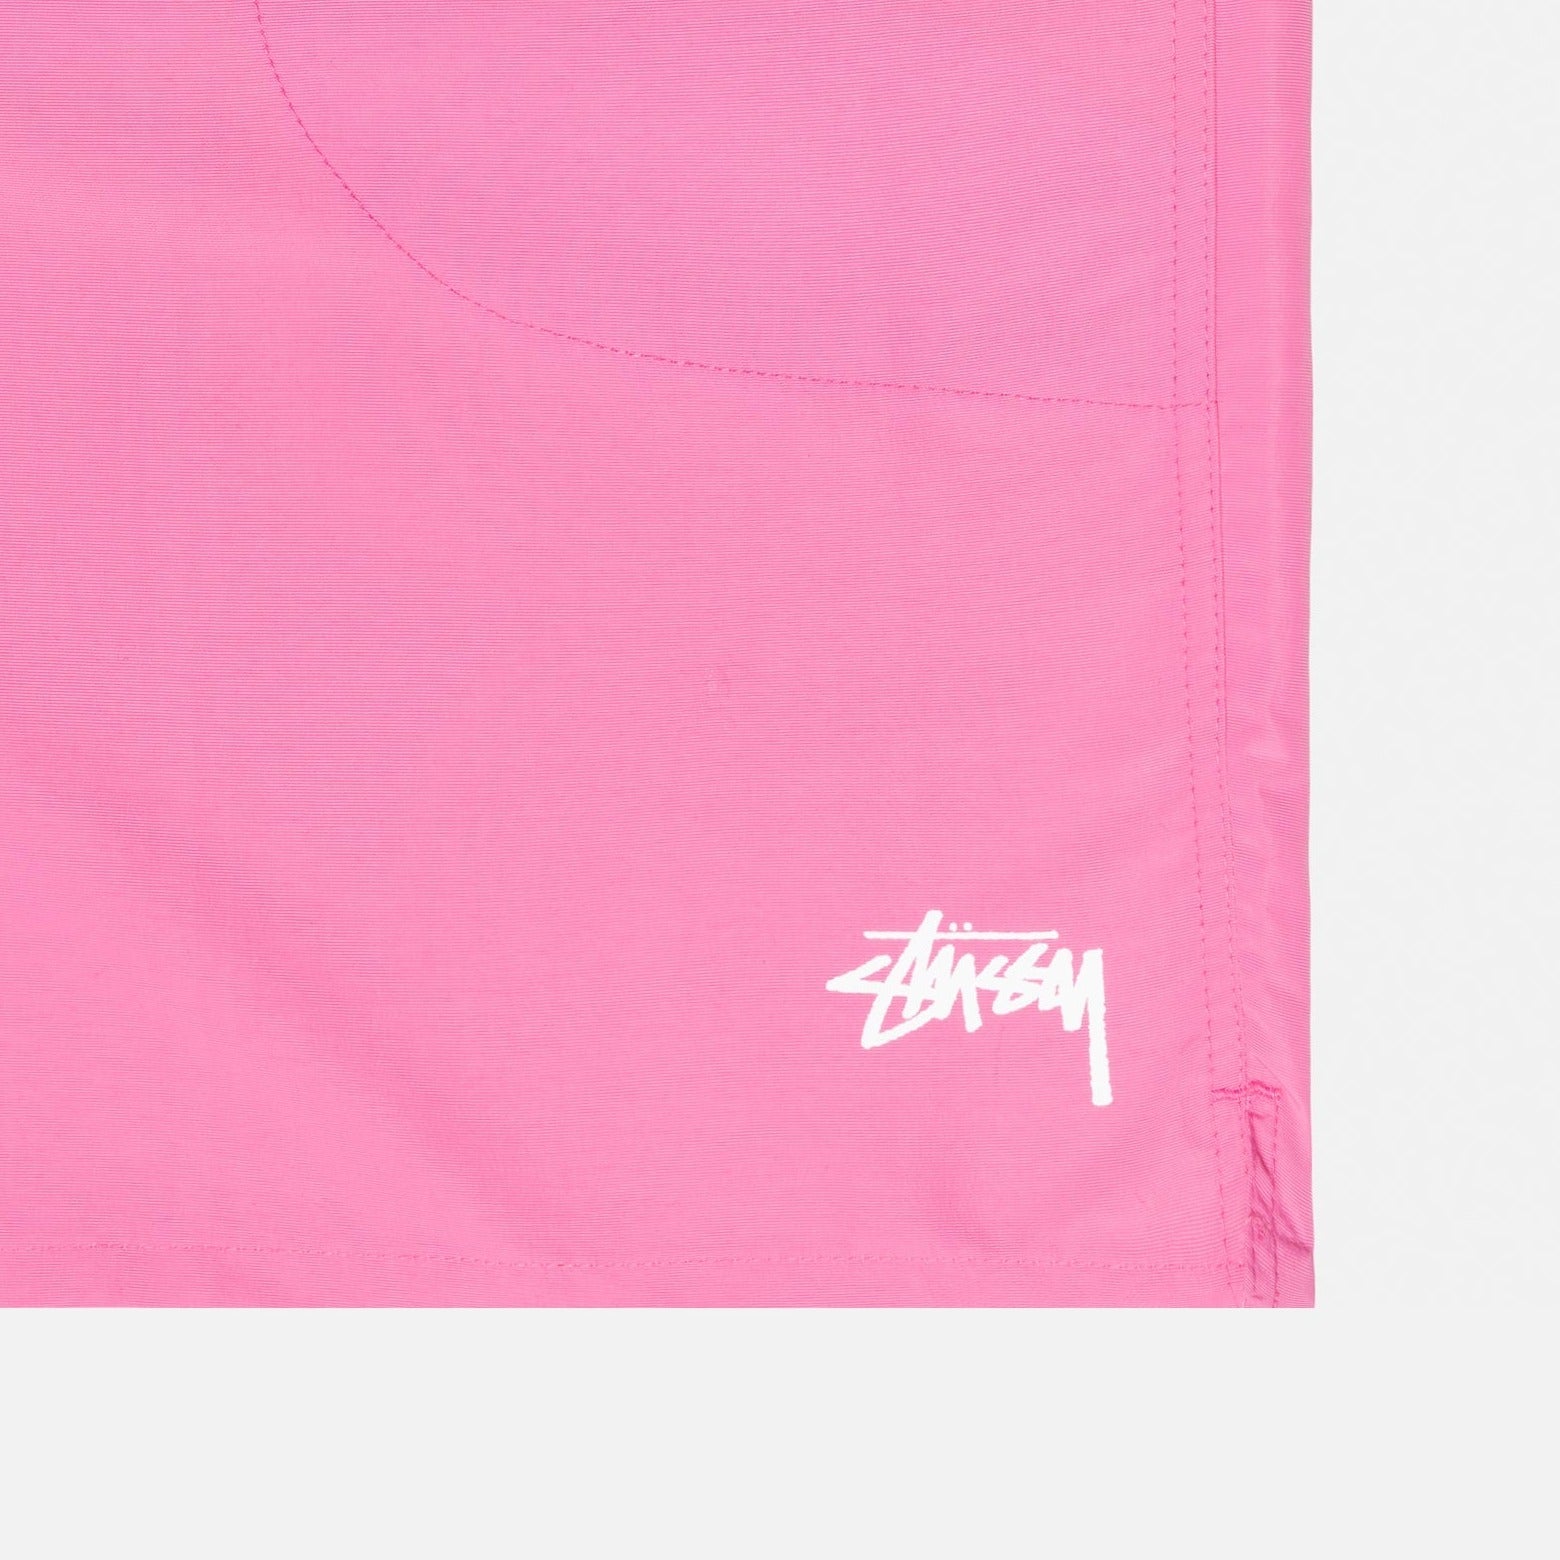 Detail photo of the stussy logo on the Stock Water Short - Gum Pink.